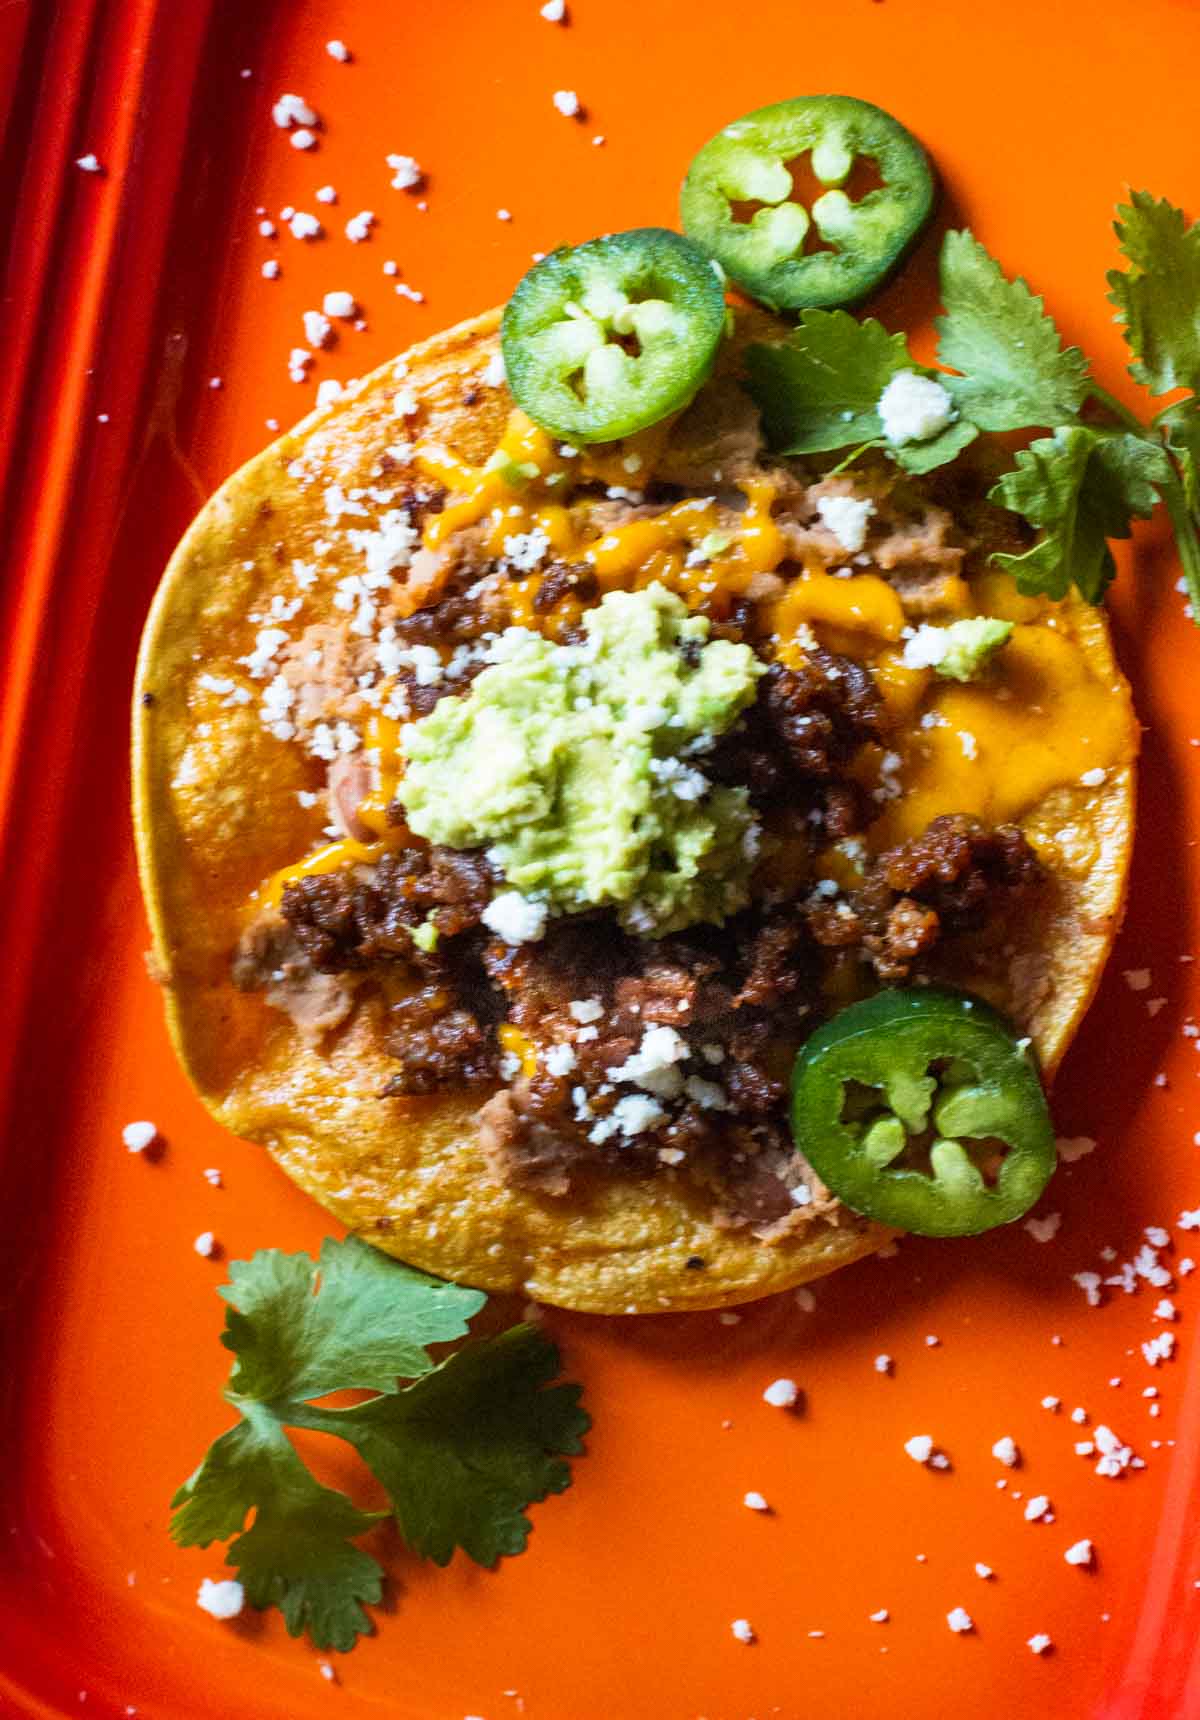 How to make a tostada with refried beans, chorizo, cheese and smashed avocado.